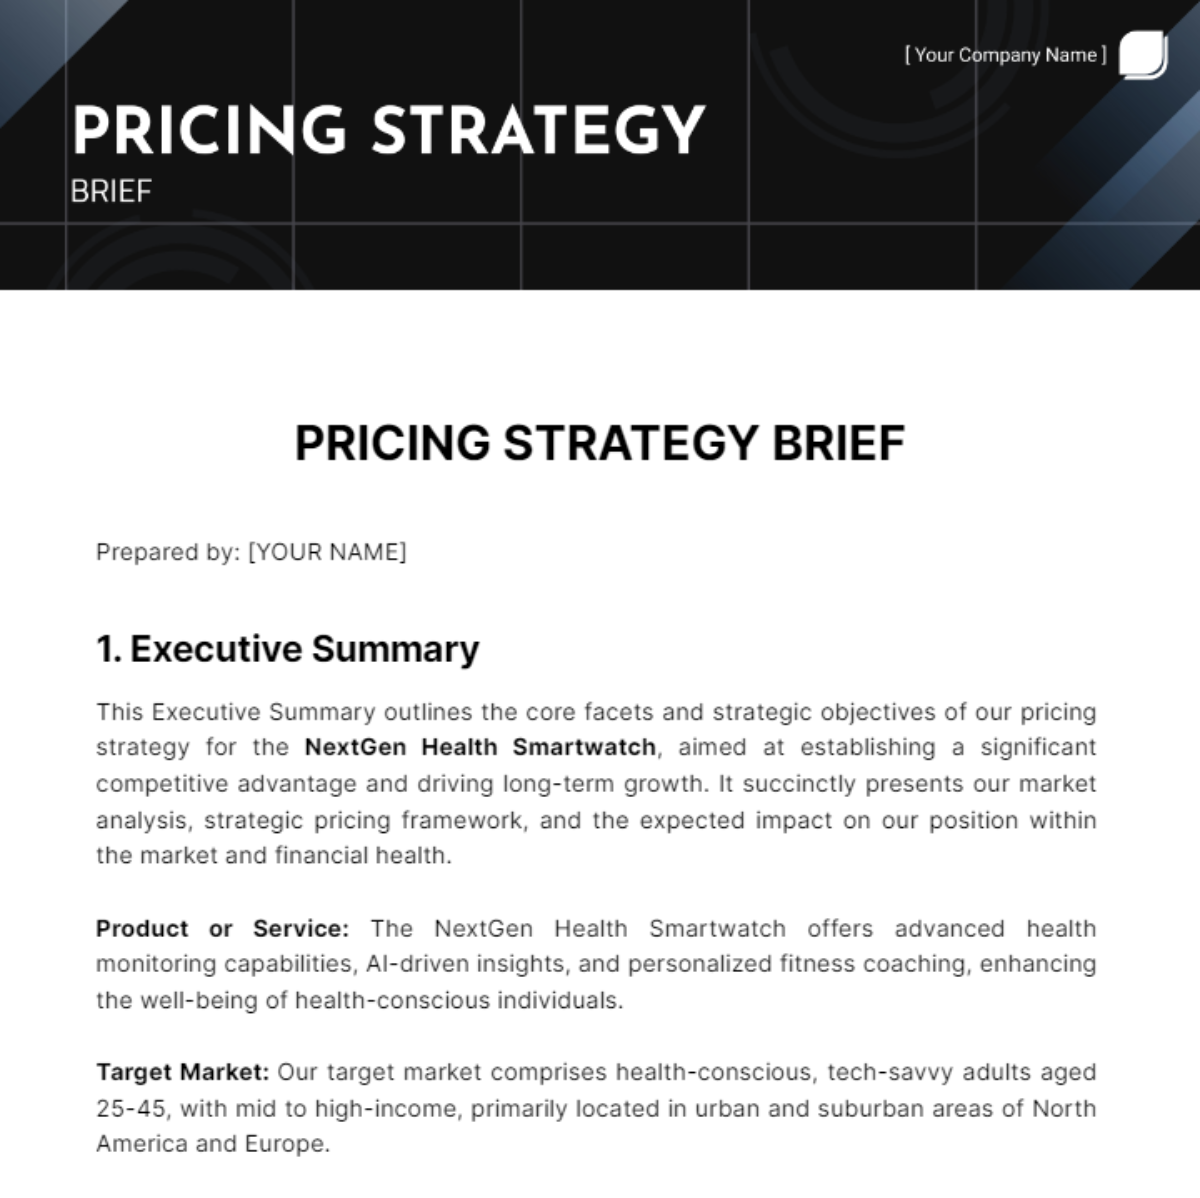 Pricing Strategy Brief Template